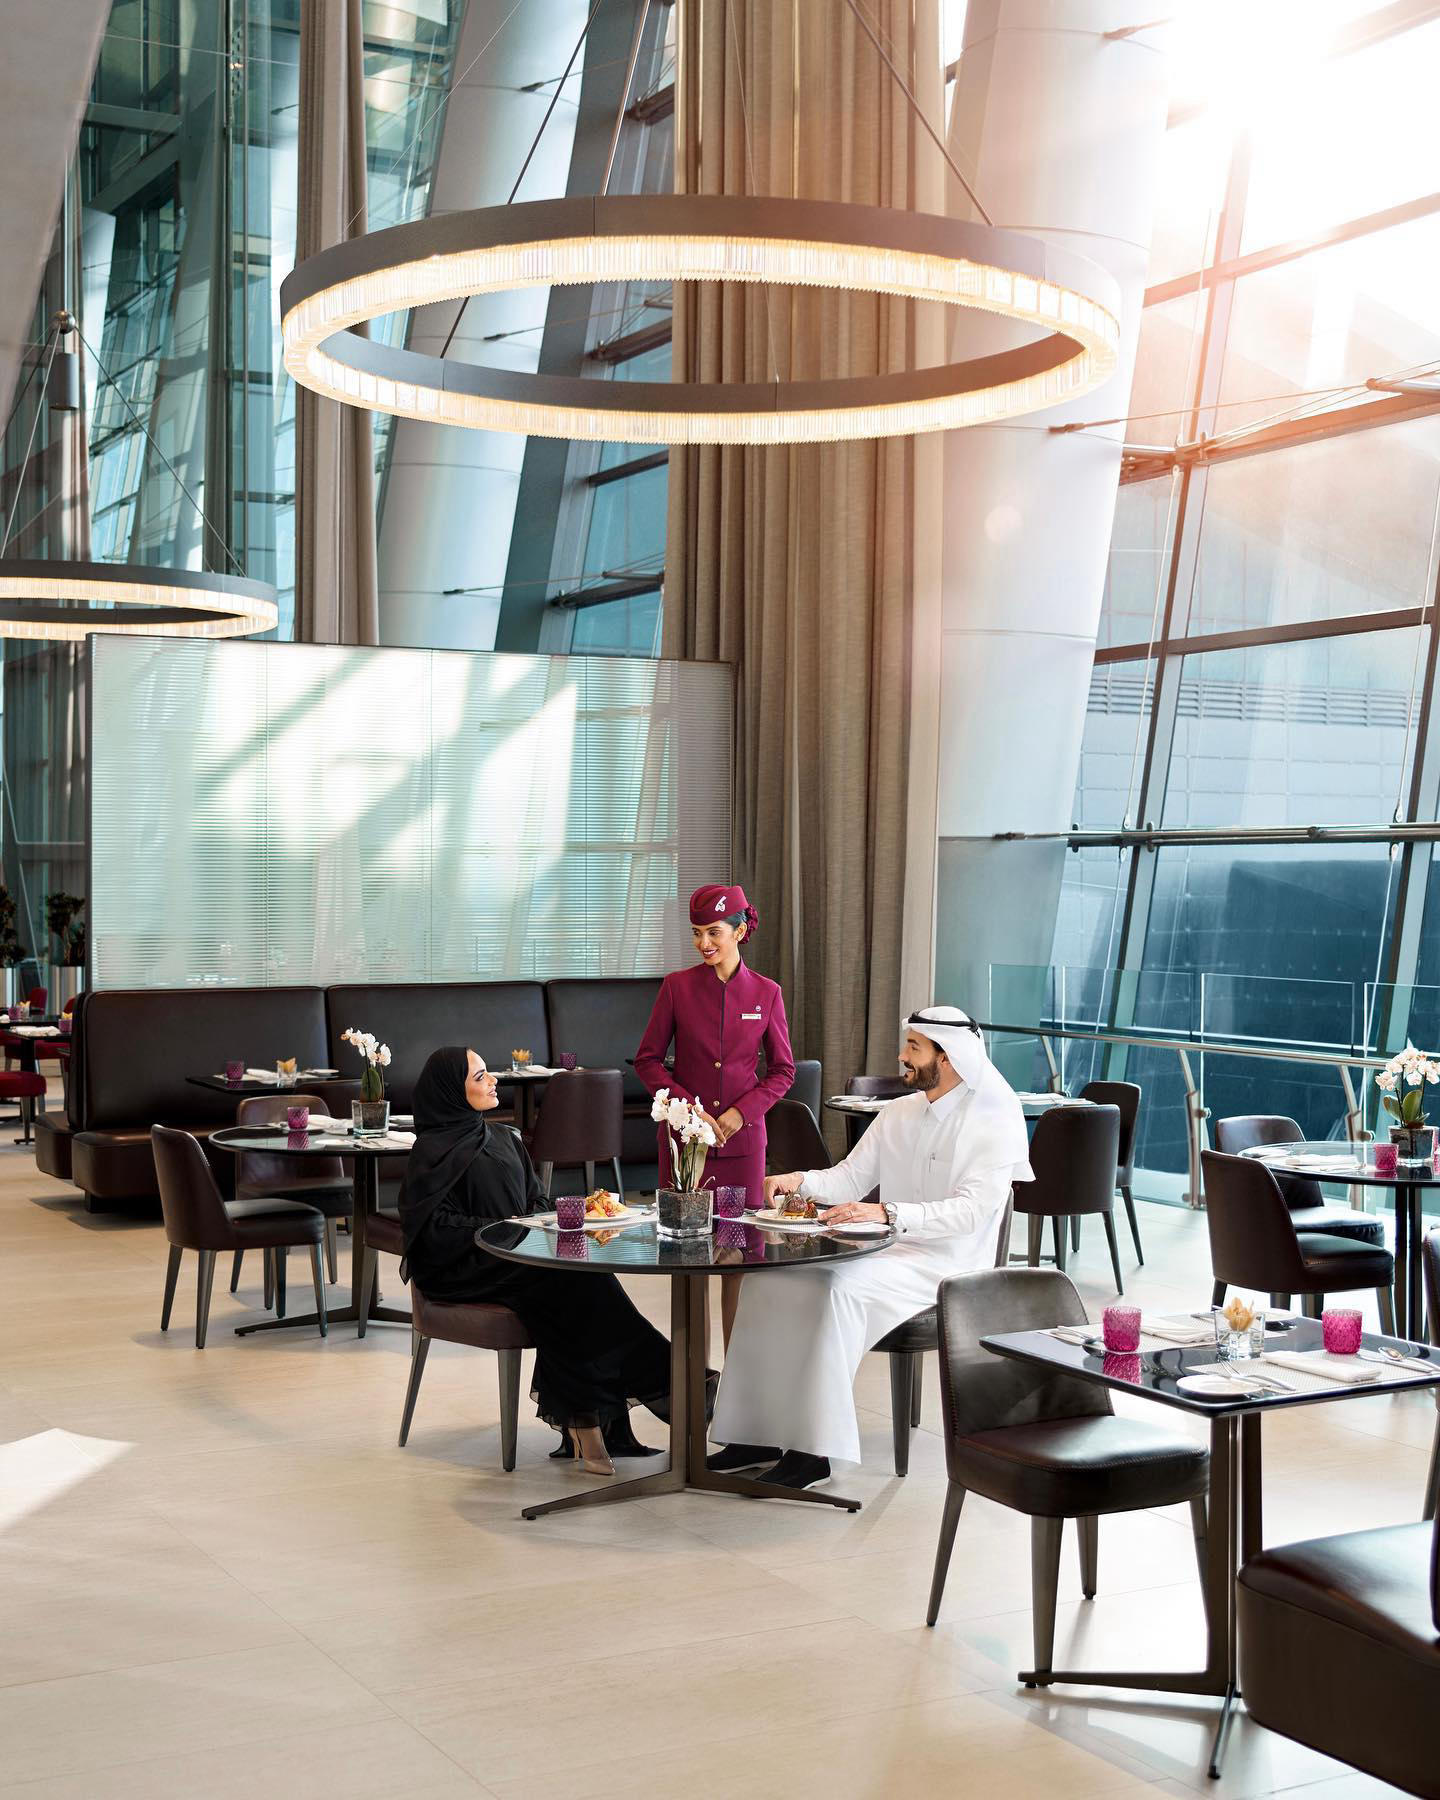 Private shopping, exquisite dining and complete tranquility make Al Safwa First Lounge a truly unriv